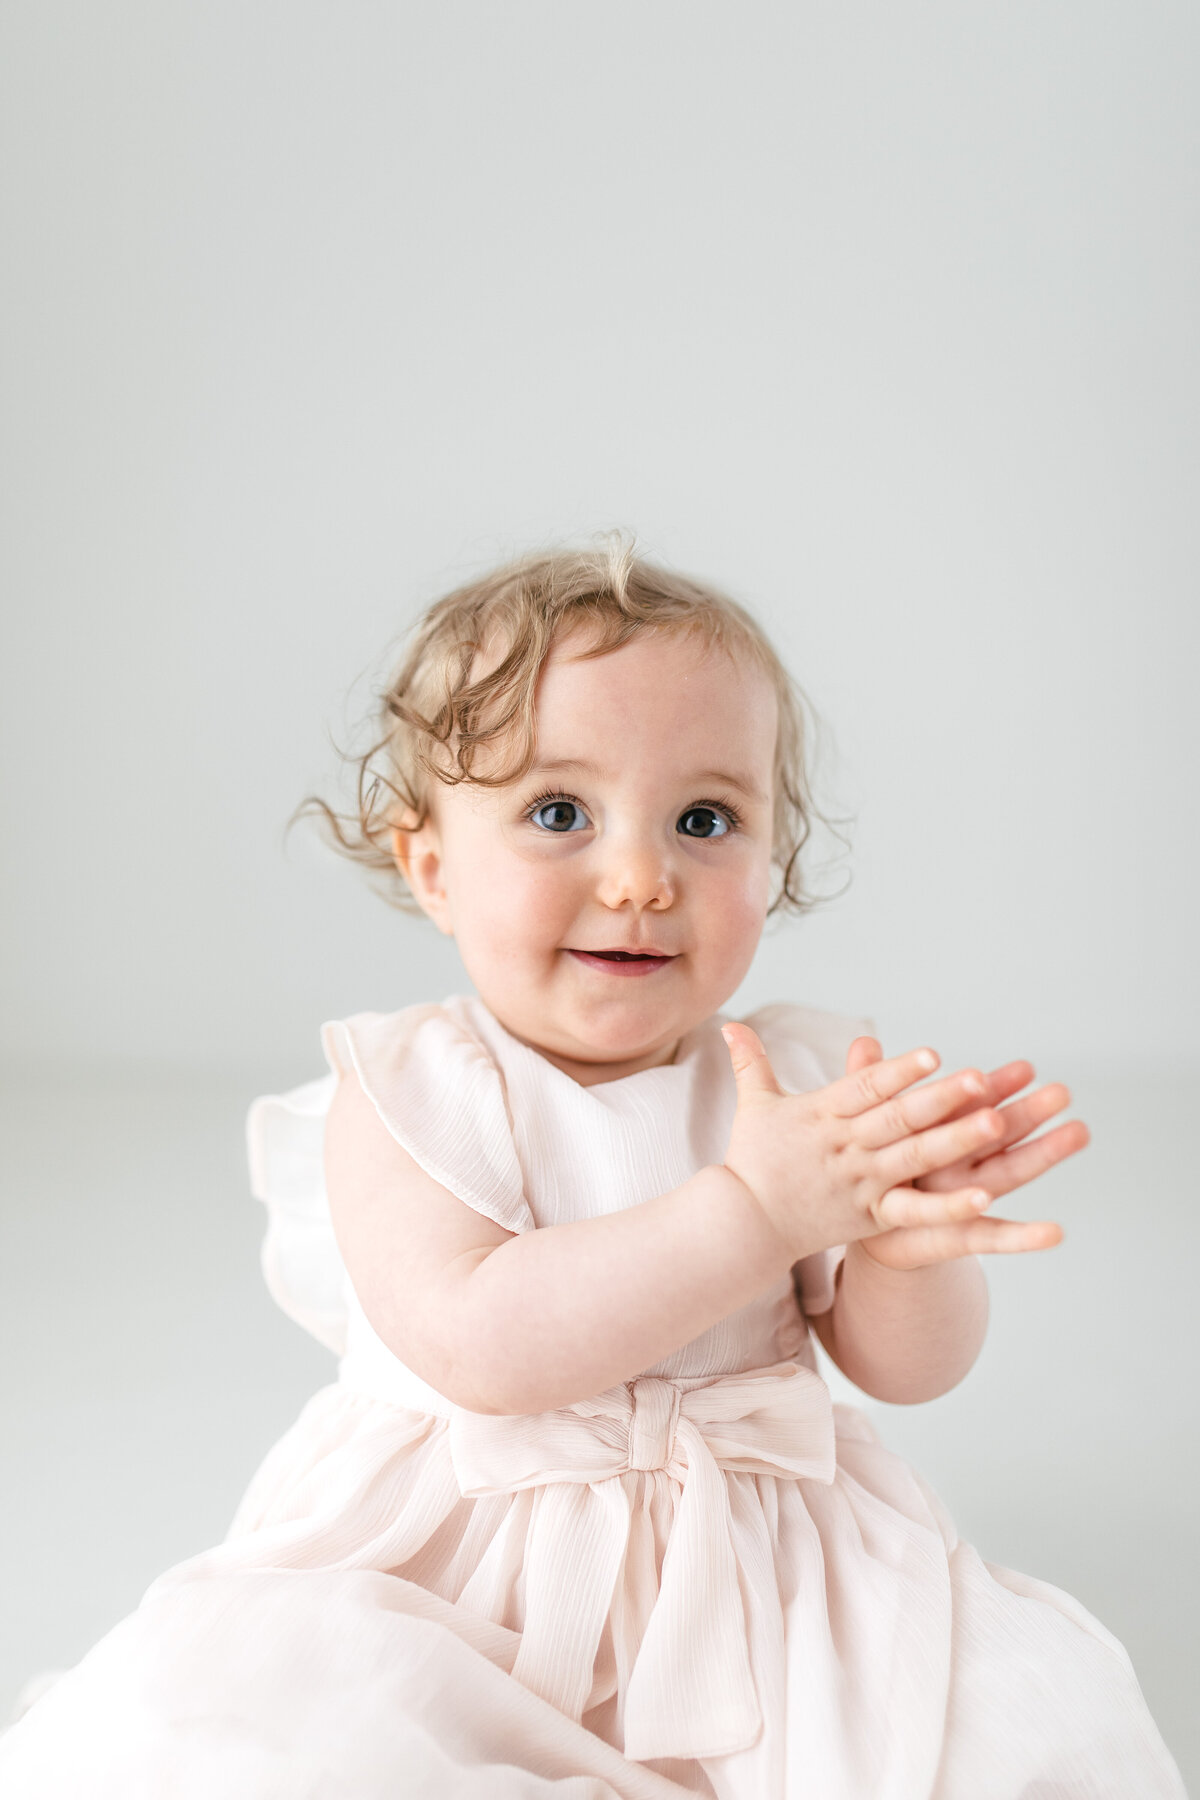 One year old girl claps her hands during her photoshoot